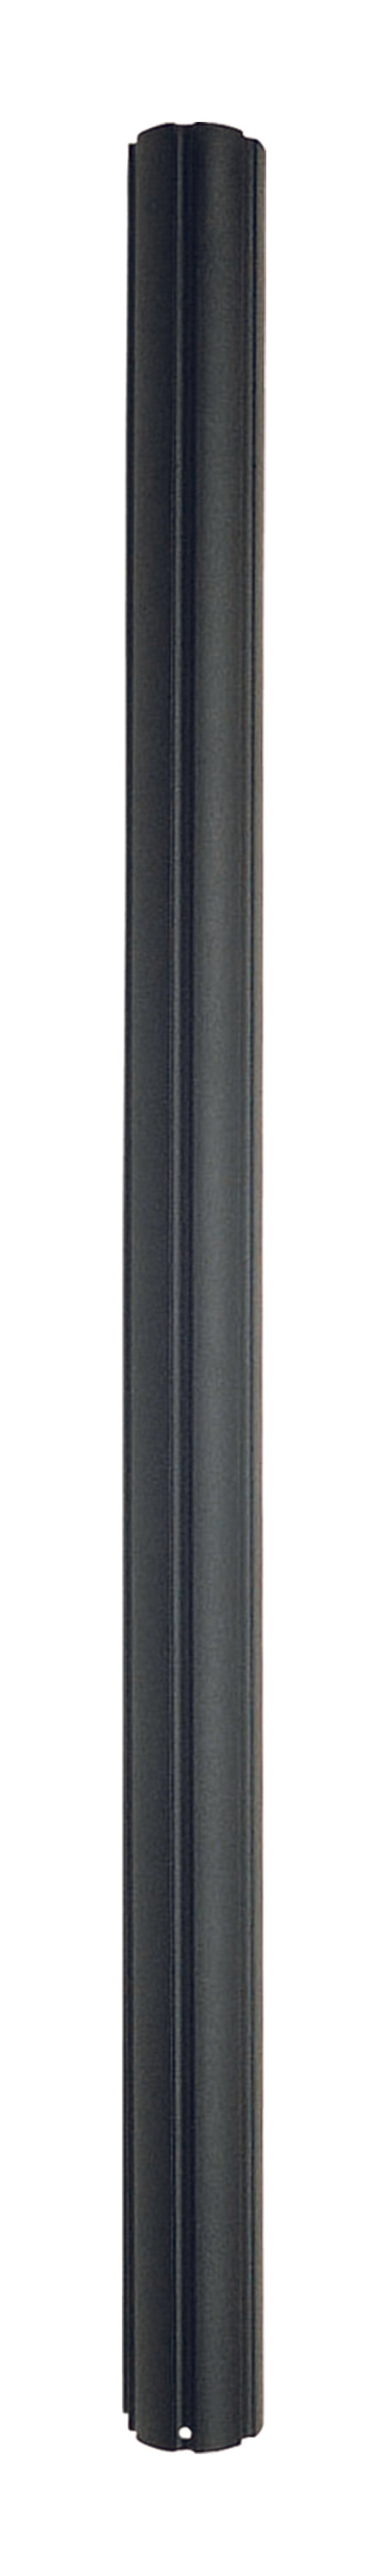 84" Burial Pole with Photo Cell